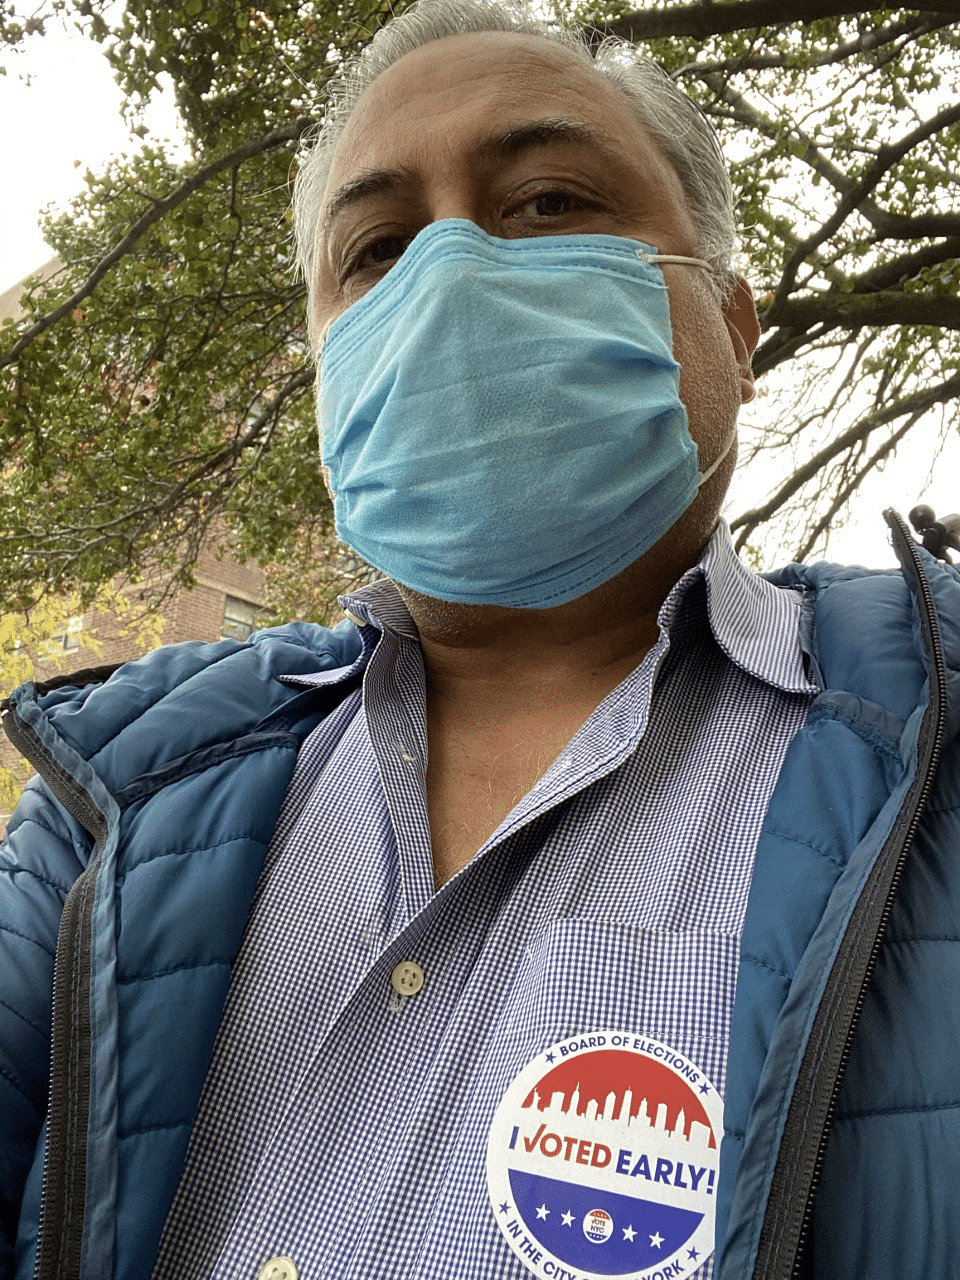 “I was out of the polling booth in about 15 mins & took a mandatory selfie,” writes Brooklyn-based Aseem Chhabra.